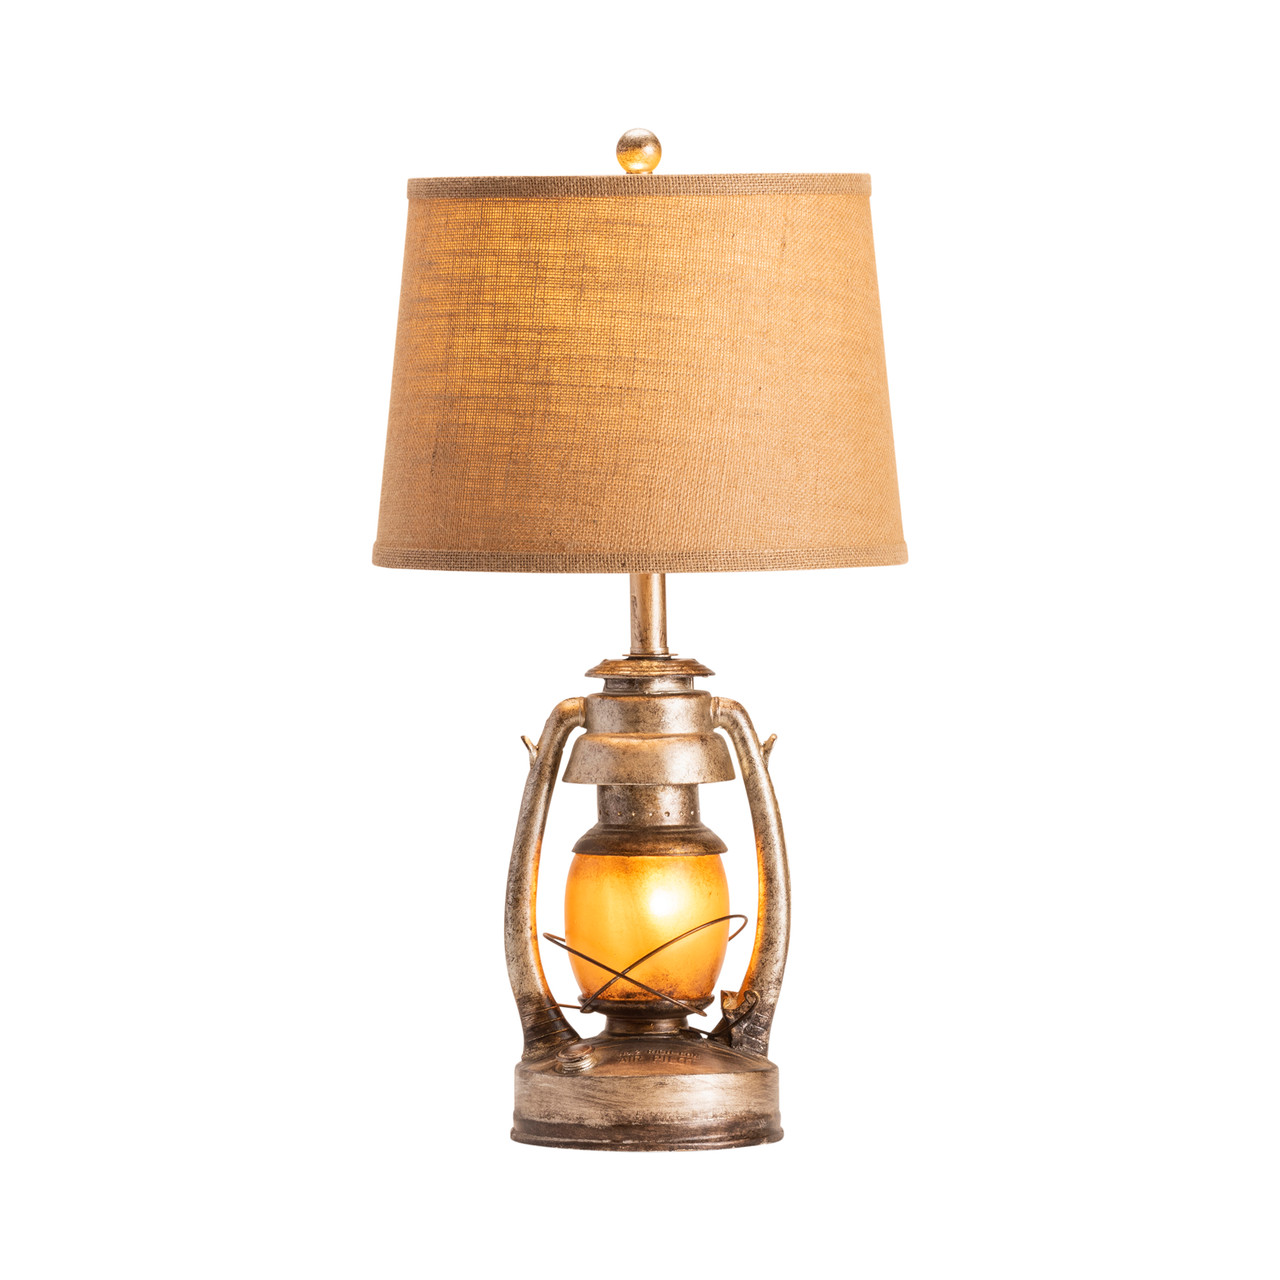 CRESTVIEW COLLECTION CIAUP530 Oil Lantern Table Lamp